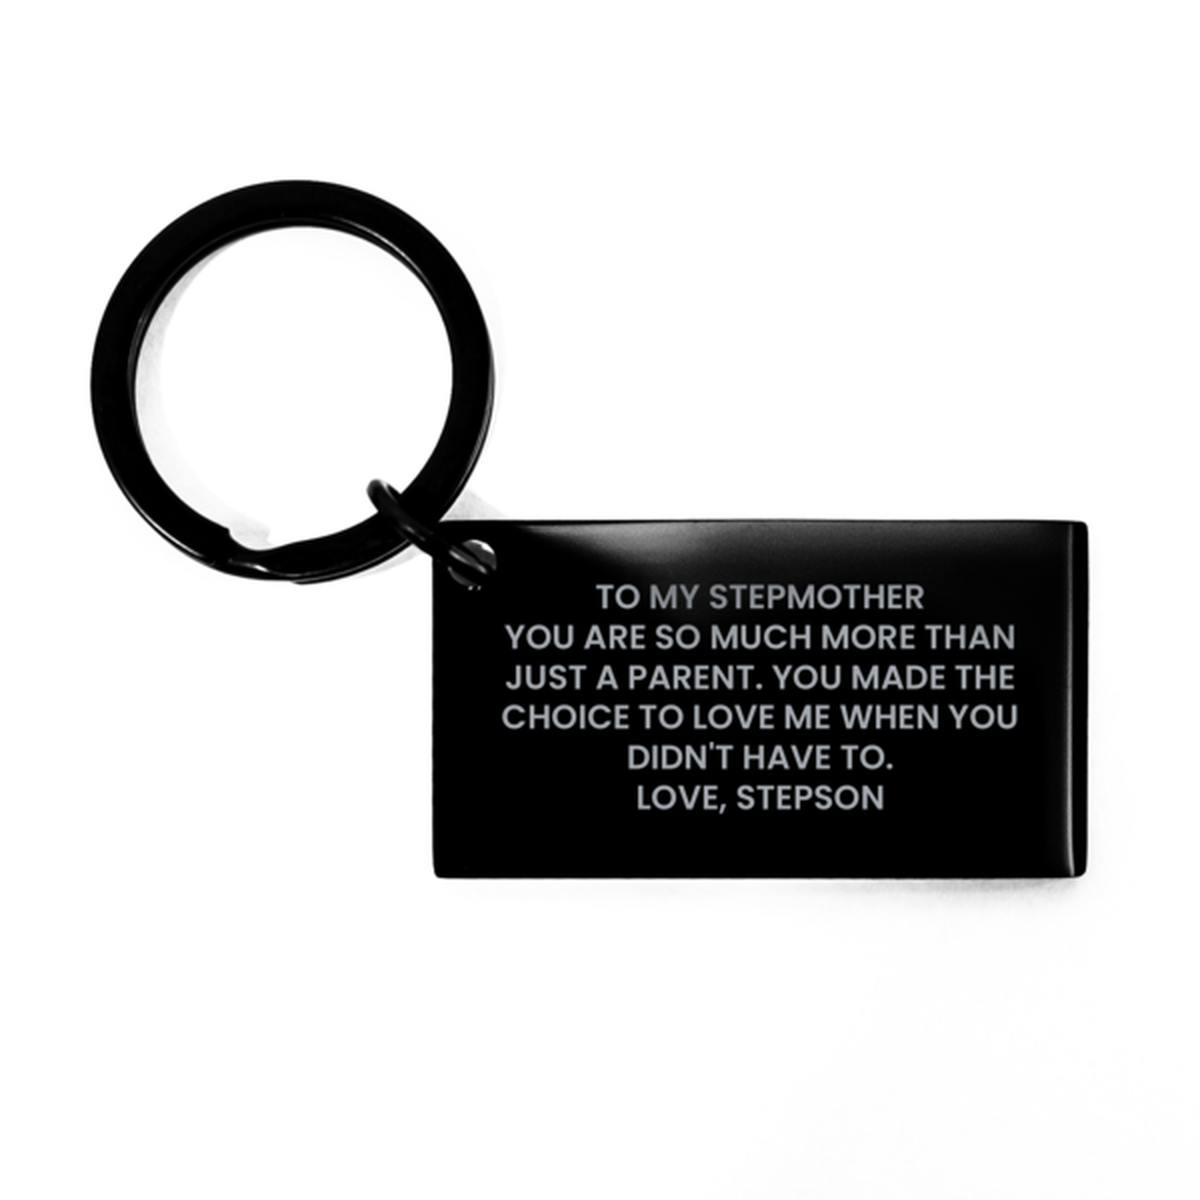 To My Stepmother Black Keychain, Just A Parent, Mothers Day Gifts For Stepmother From Stepson, Birthday Gifts For Women